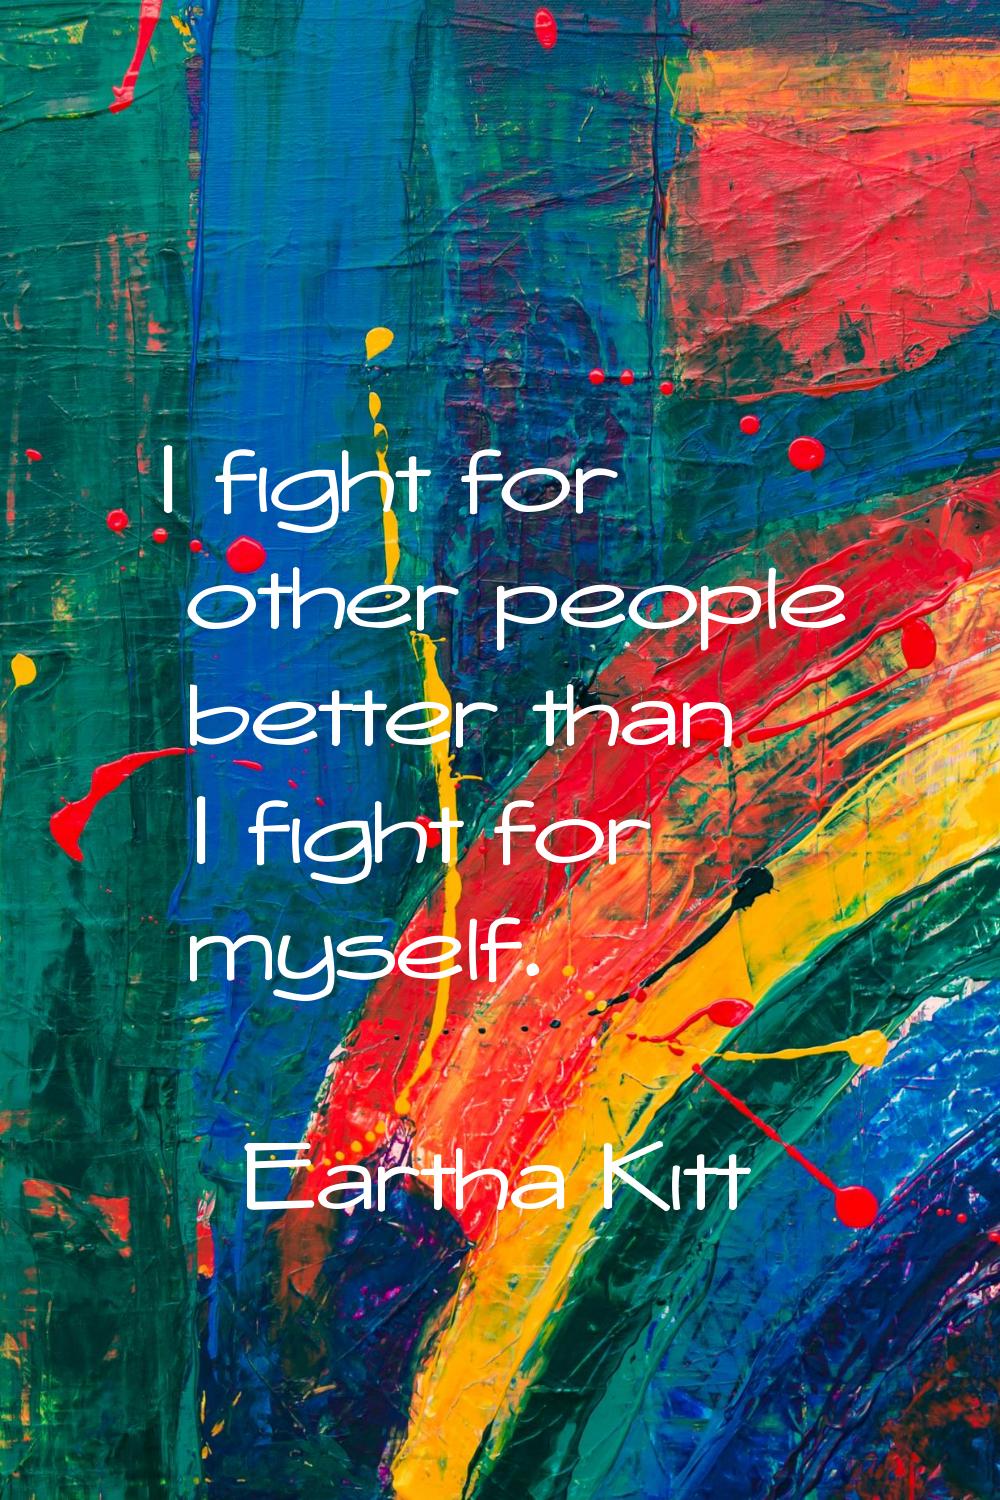 I fight for other people better than I fight for myself.